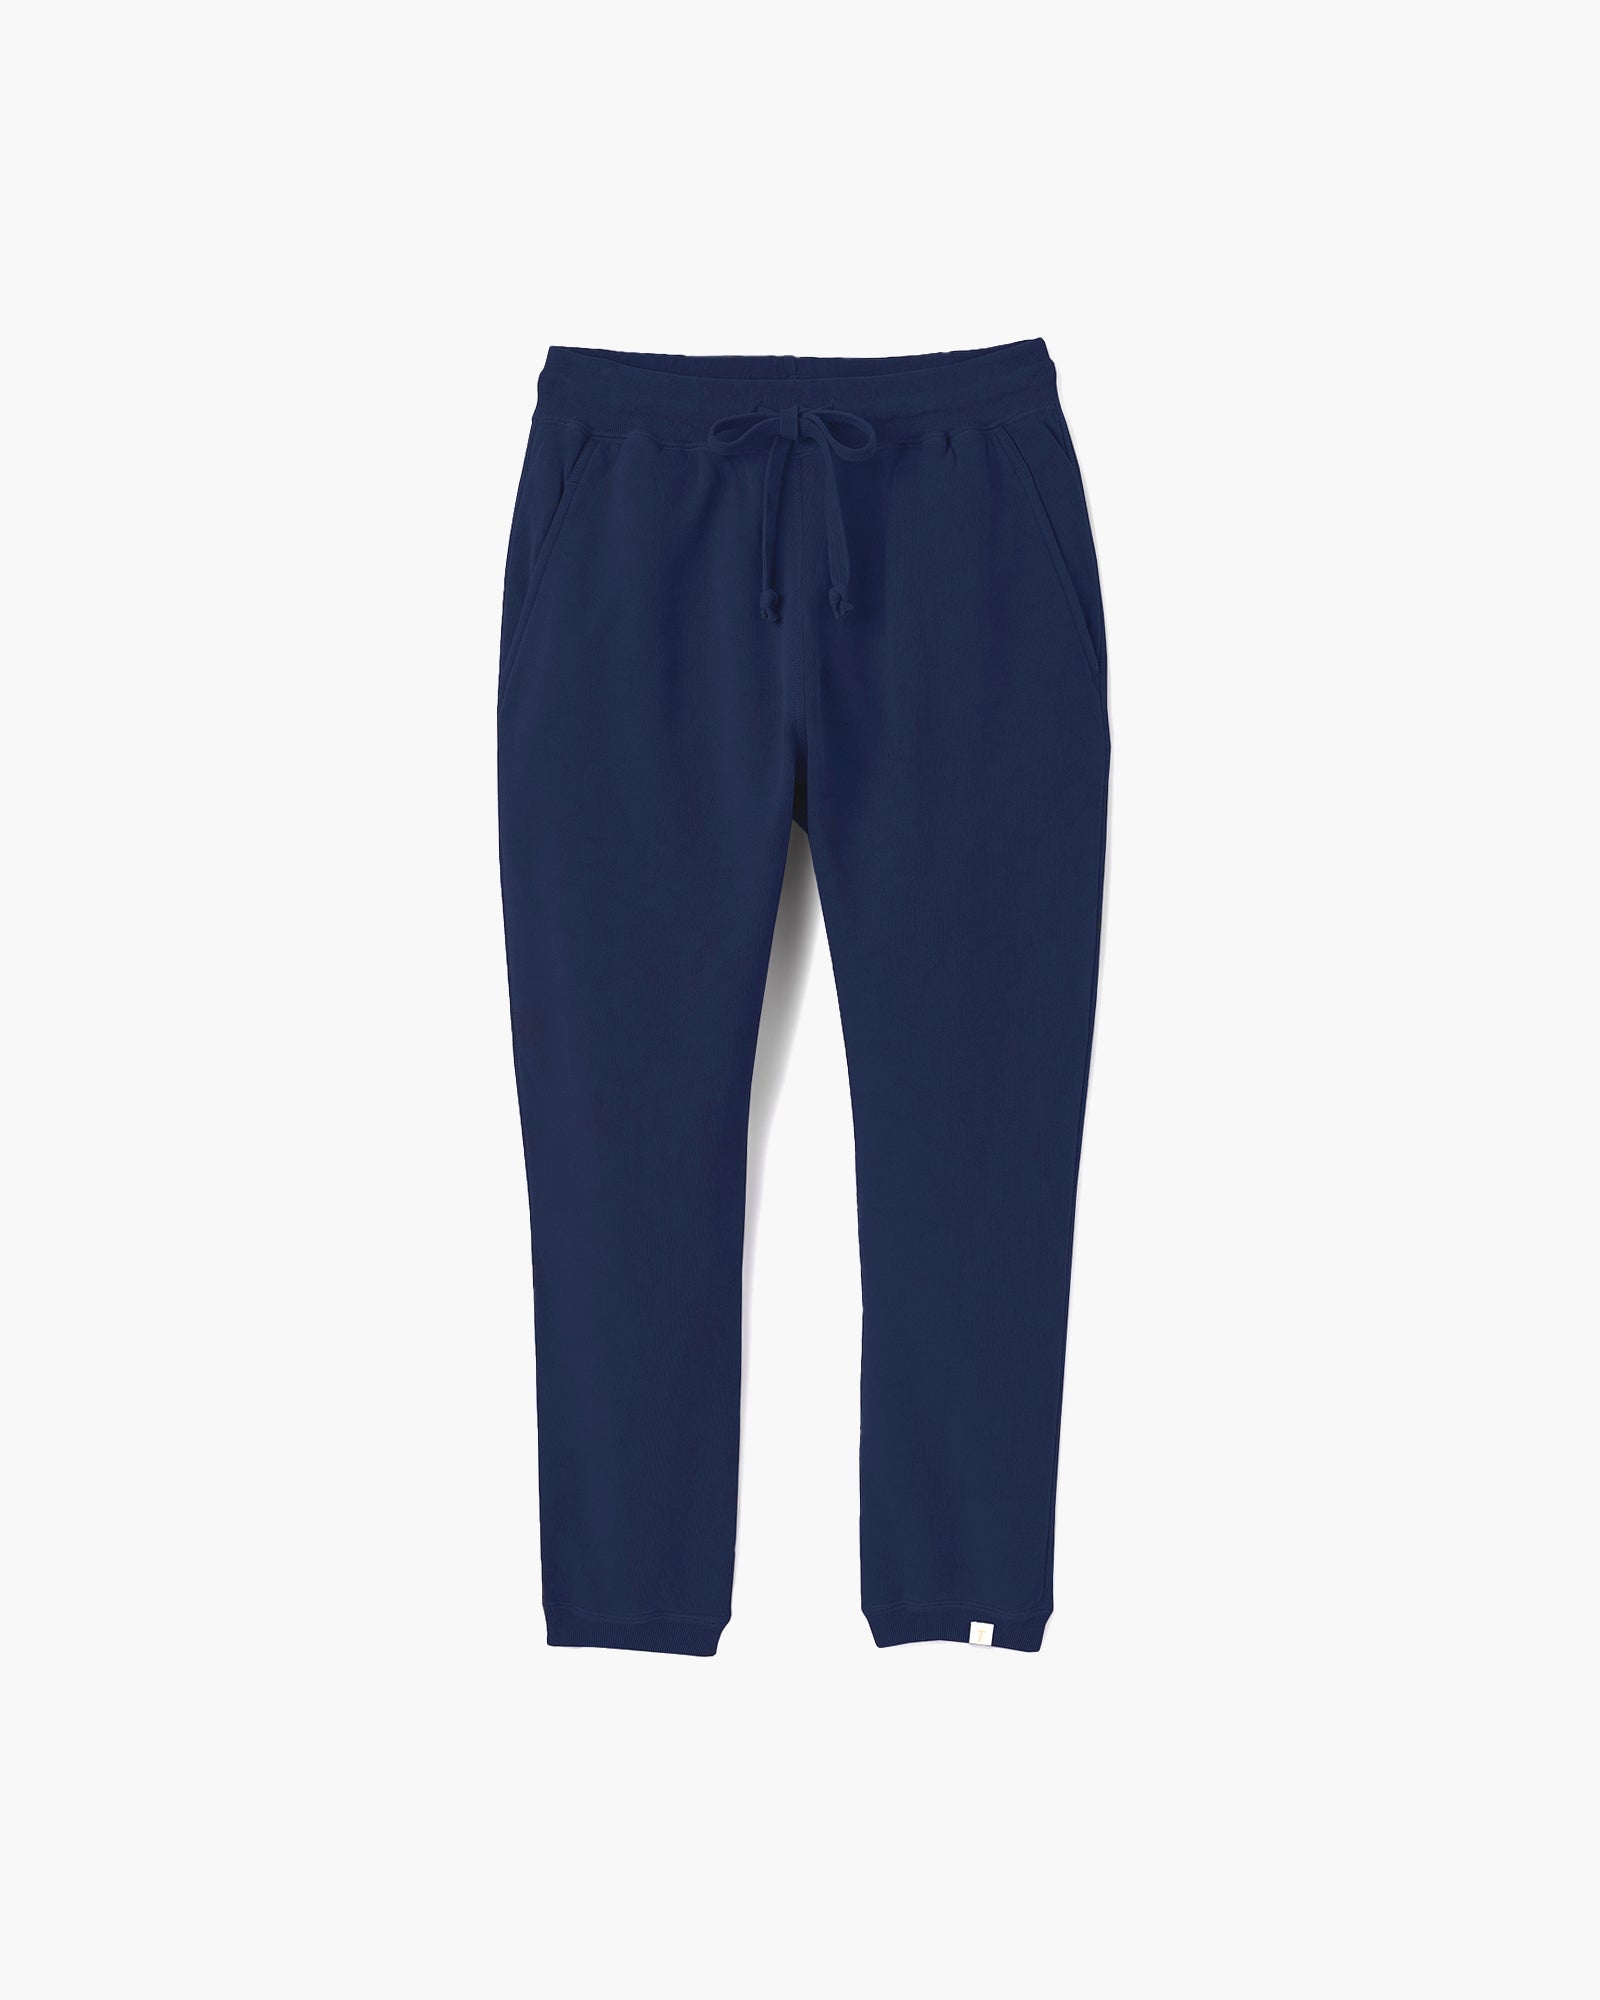 Core Jogger in Navy | Sweatpants | Unisex Clothing – TKEES